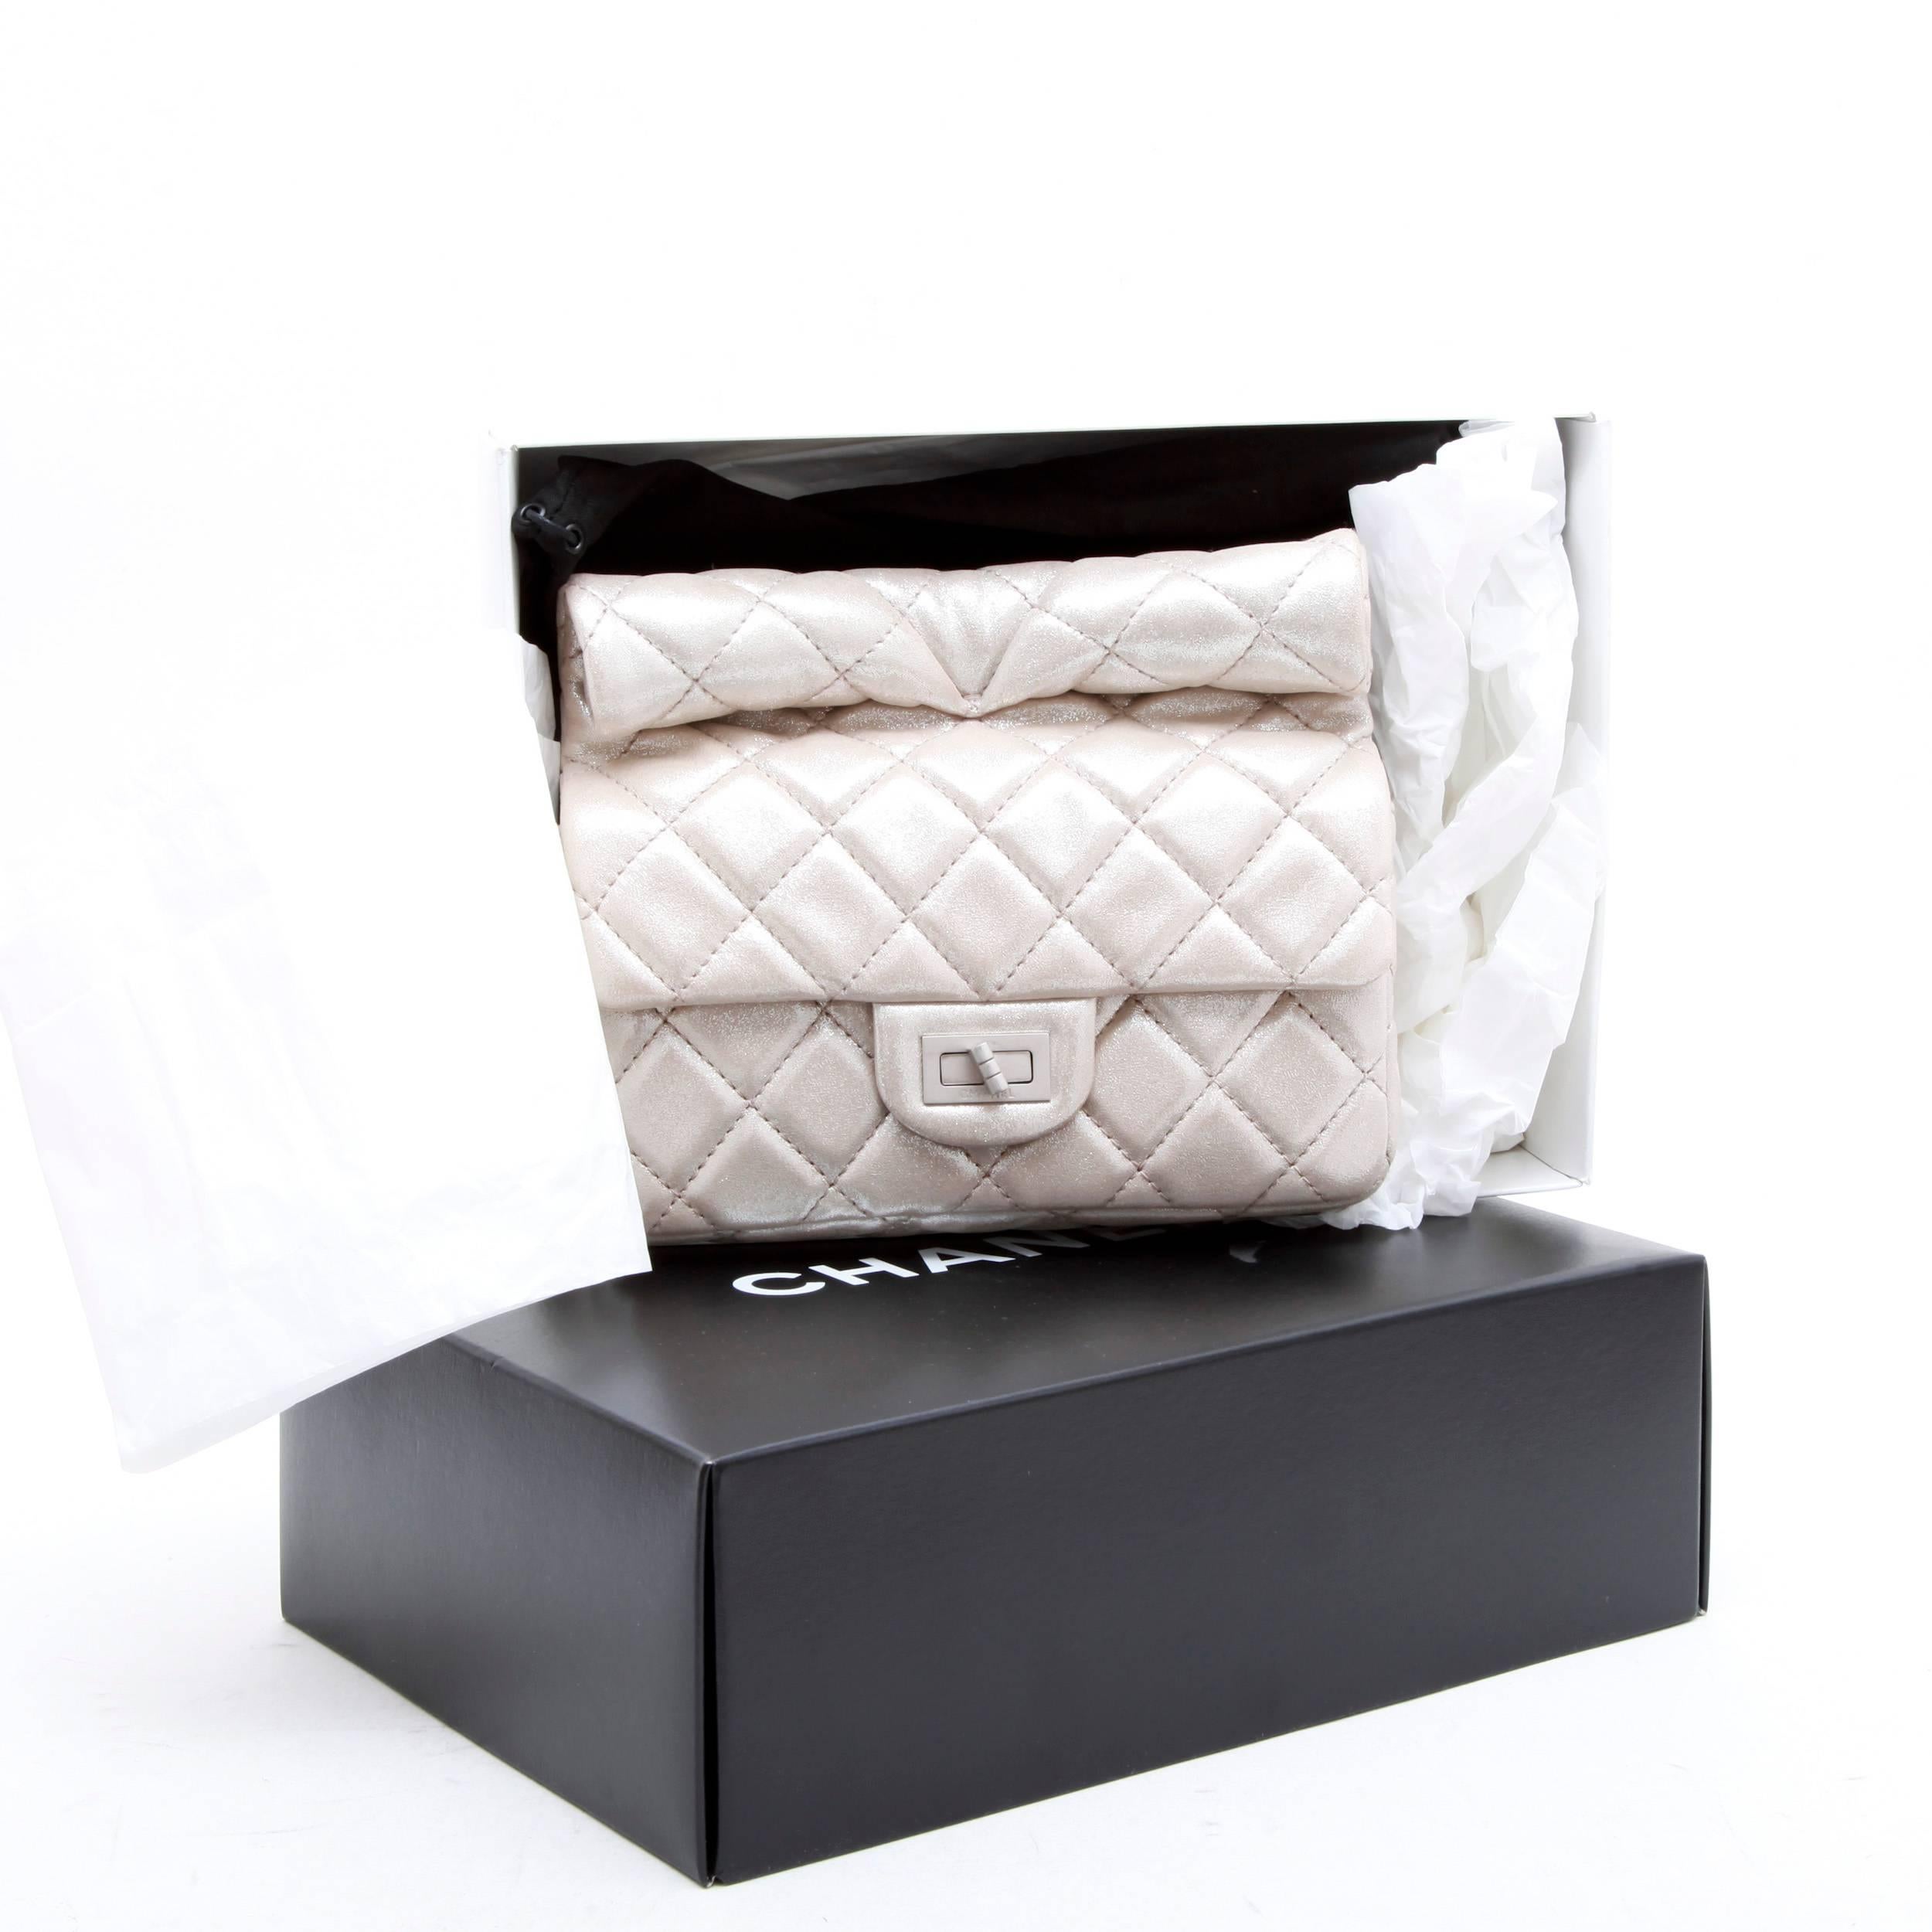 CHANEL Evening Bag in Light Iridescent Silver Lamé Leather 6